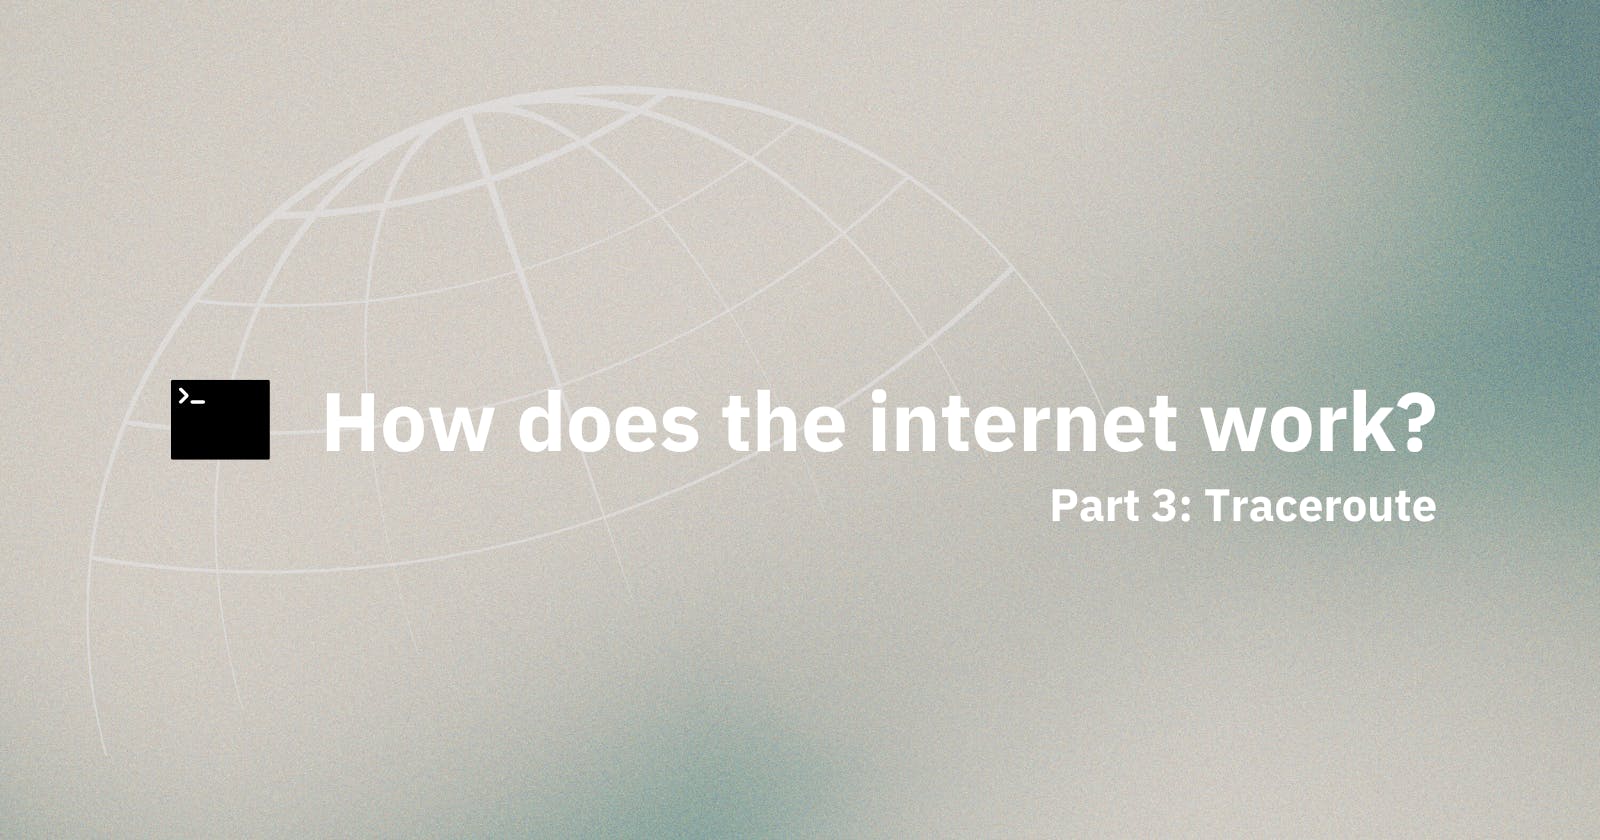 How Does the Internet Work? Part 3 - Traceroute